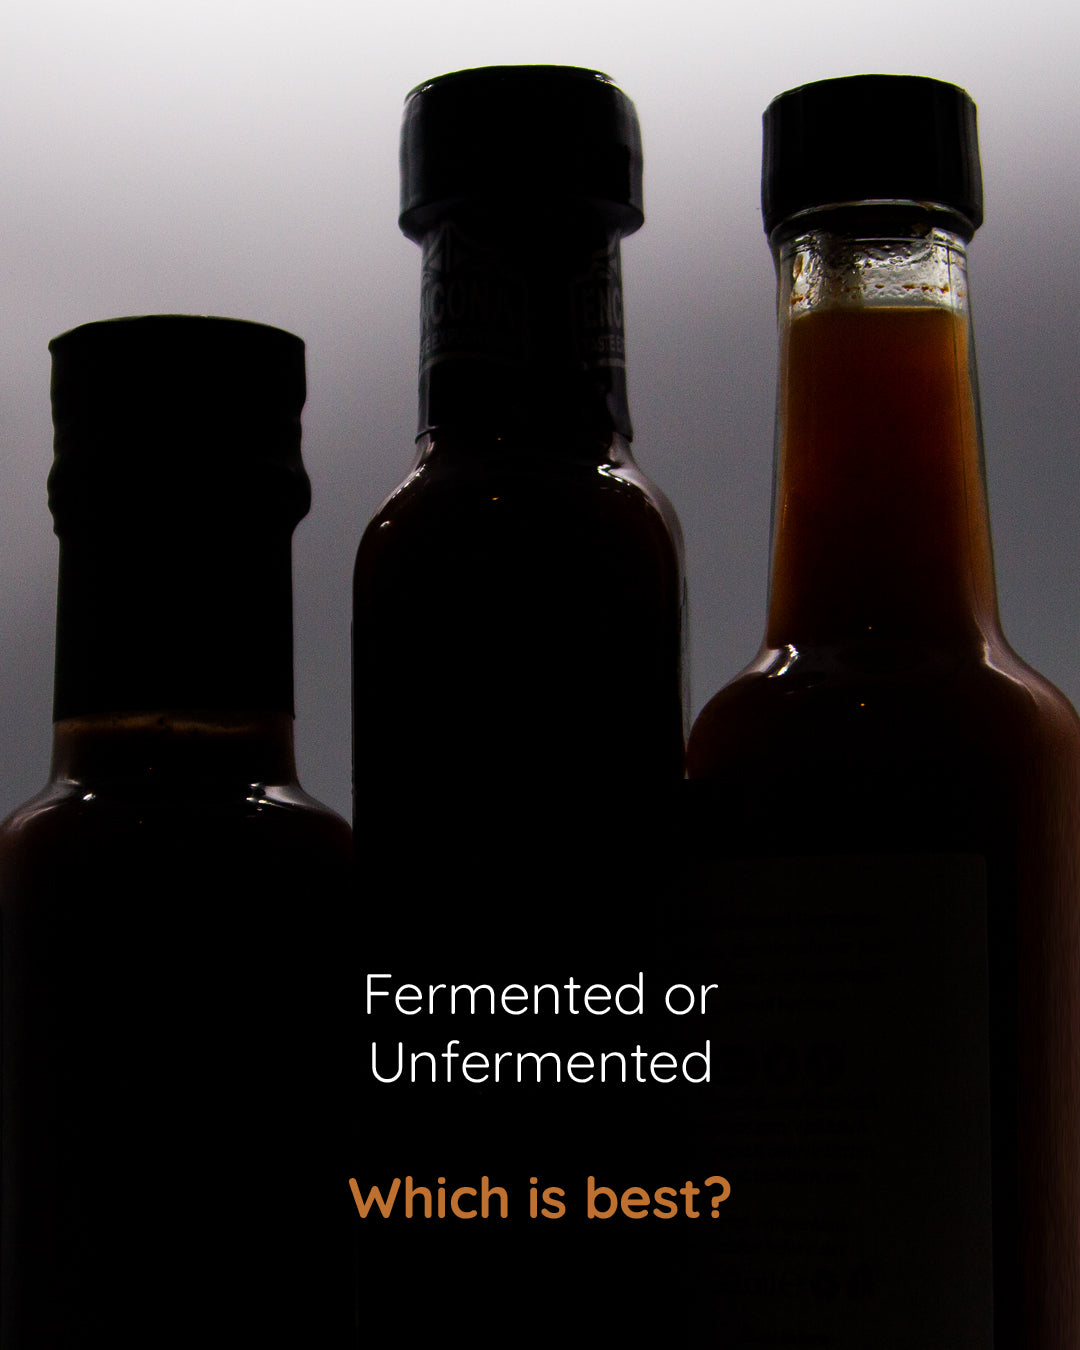 Fermented or Unfermented hot sauce: Which is best?